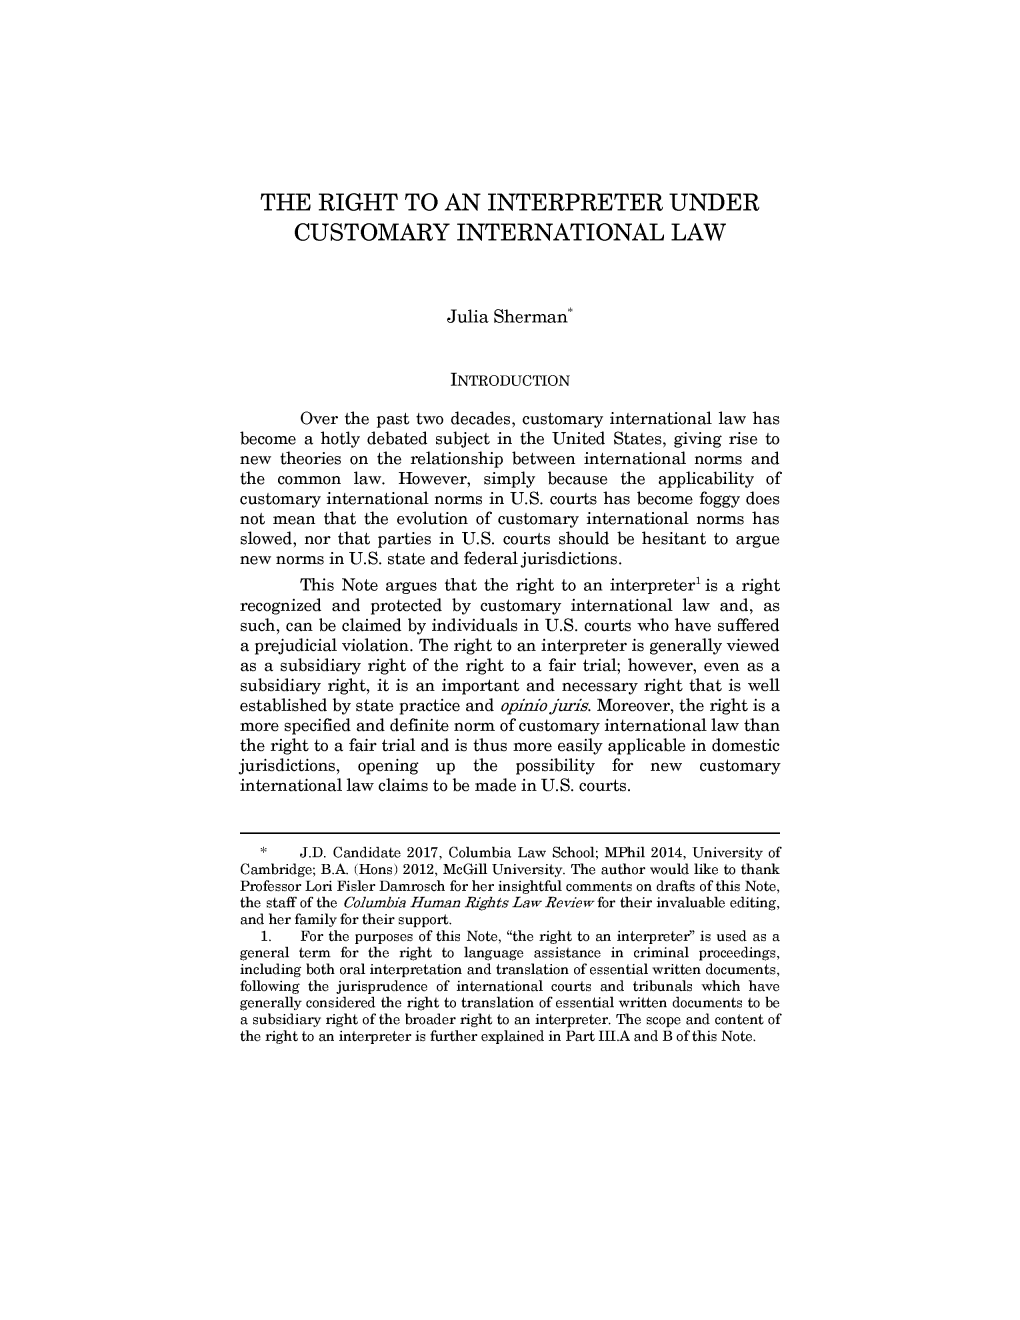 The Right to an Interpreter Under Customary International Law